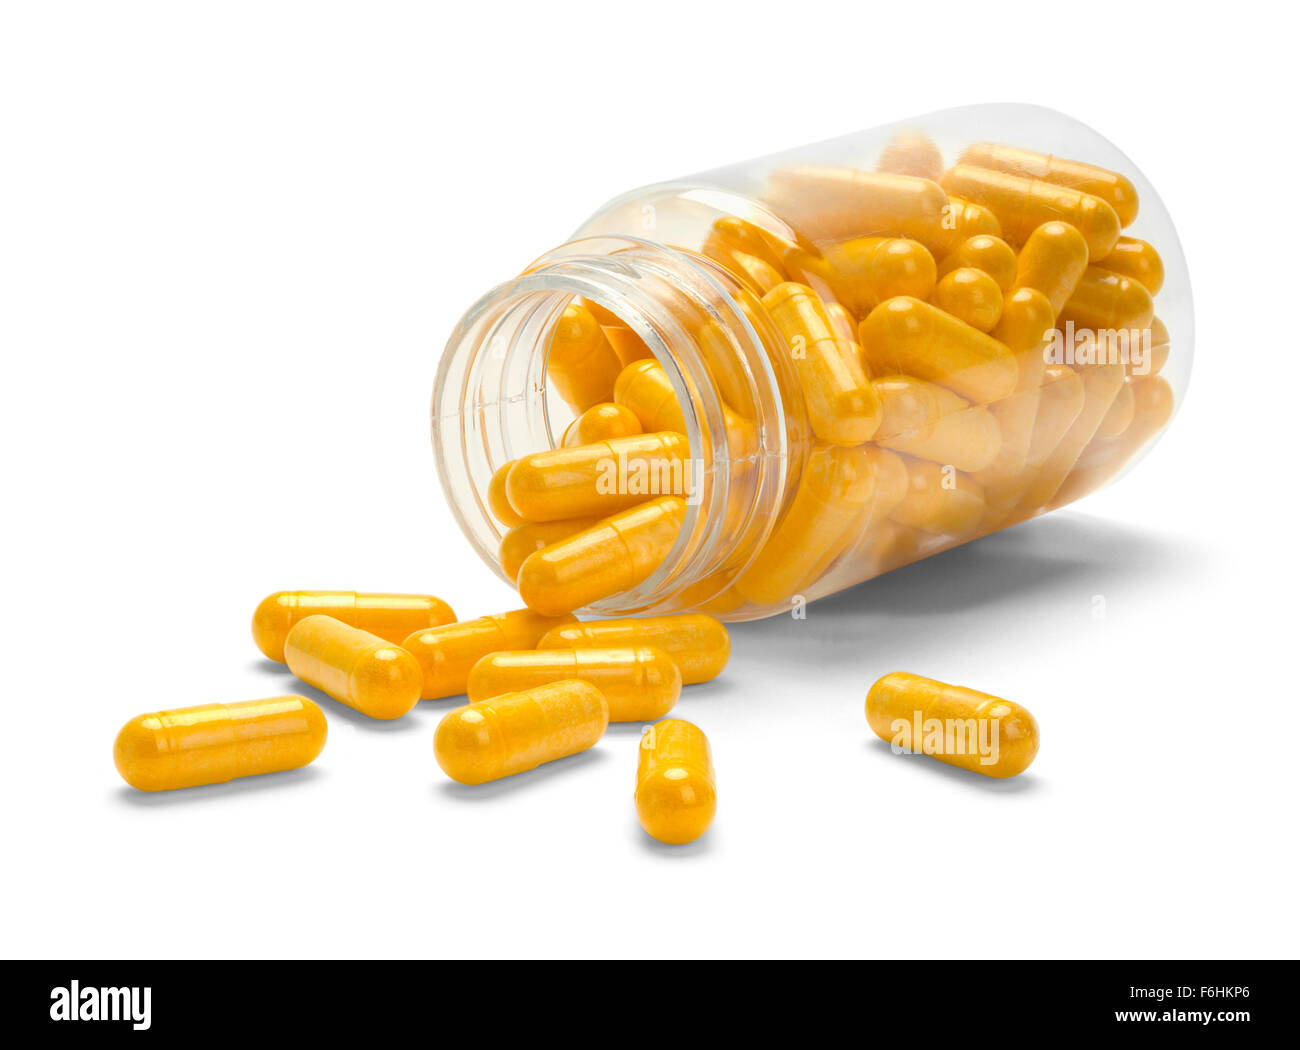 Bottle of Medicine Pills Open and Tipped Over Isolated on a White Background. Stock Photo